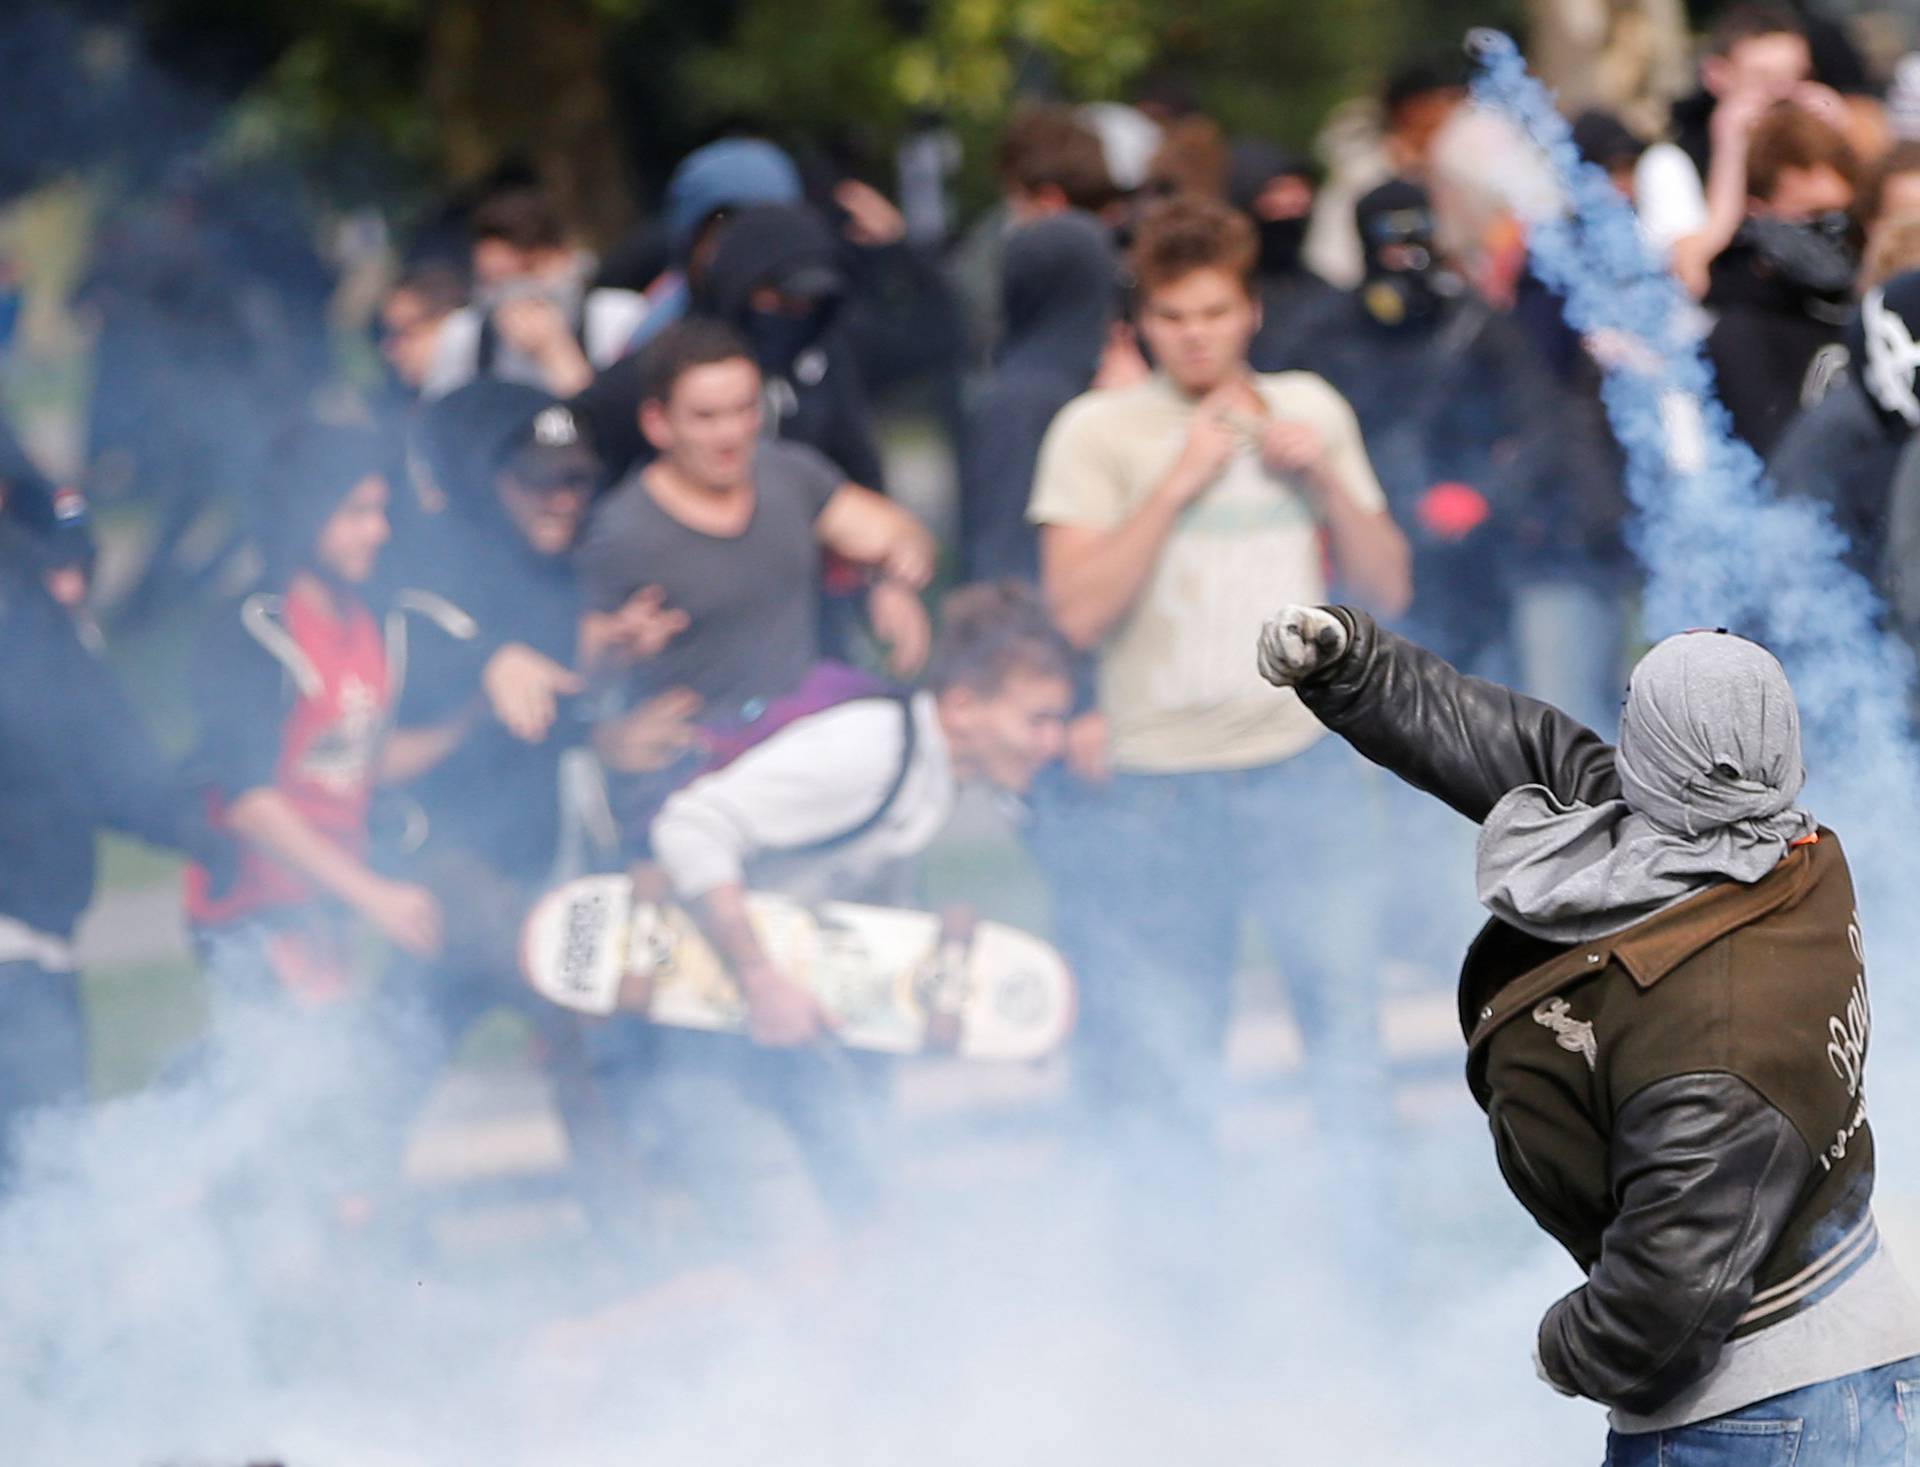 A demonstrator throws back a tear gas during a national strike and protest against the government's labour reforms in Nantes